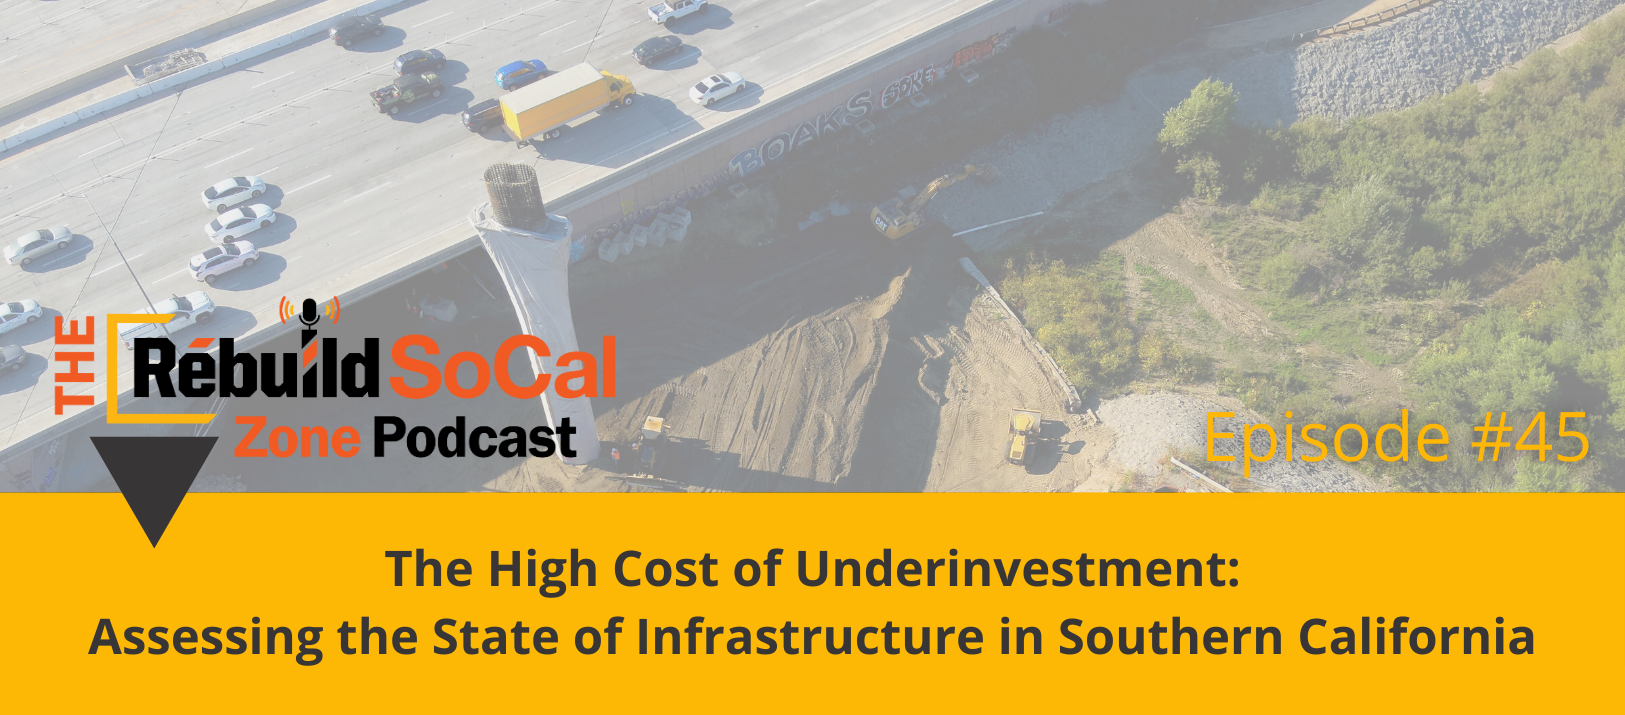 The High Cost of Underinvestment: Assessing the State of Infrastructure in Southern California